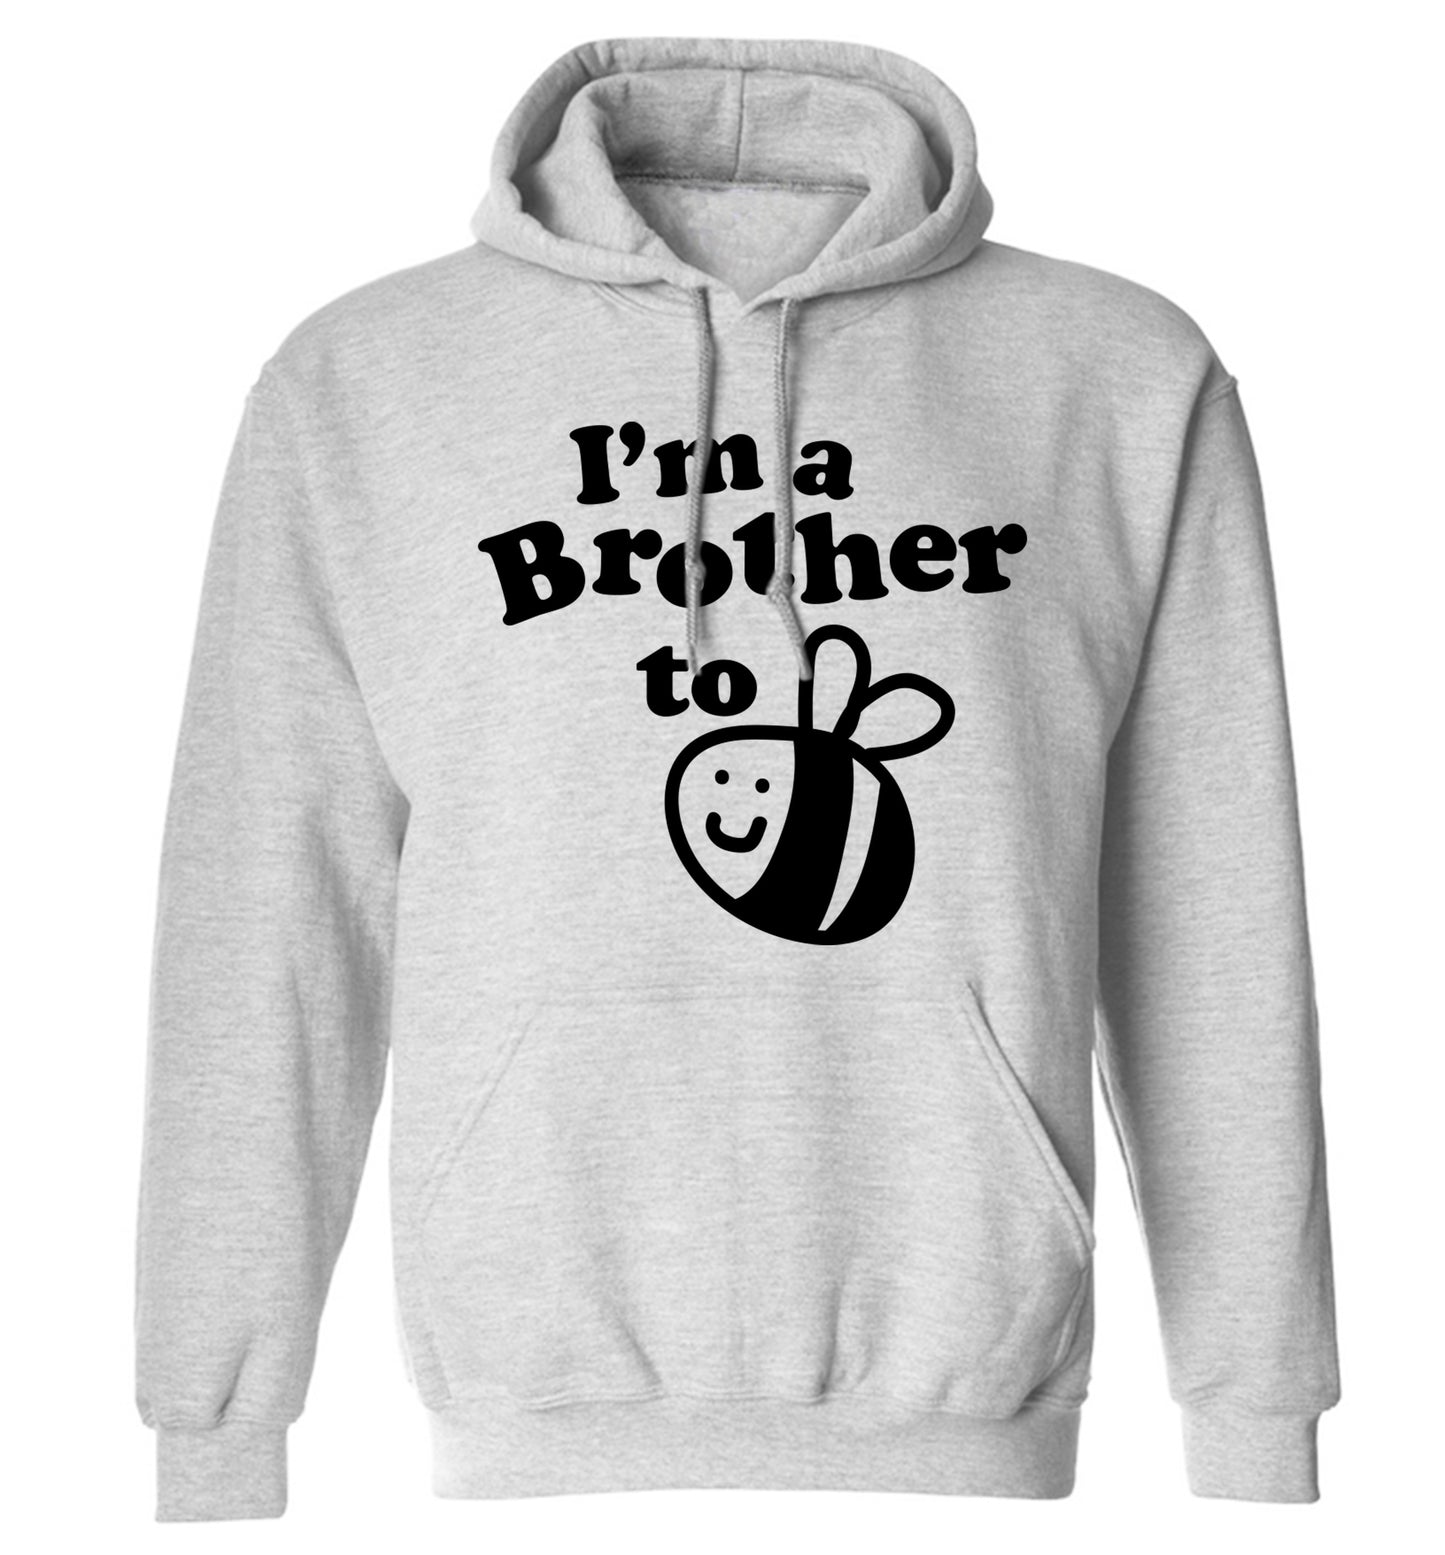 I'm a brother to be adults unisex grey hoodie 2XL